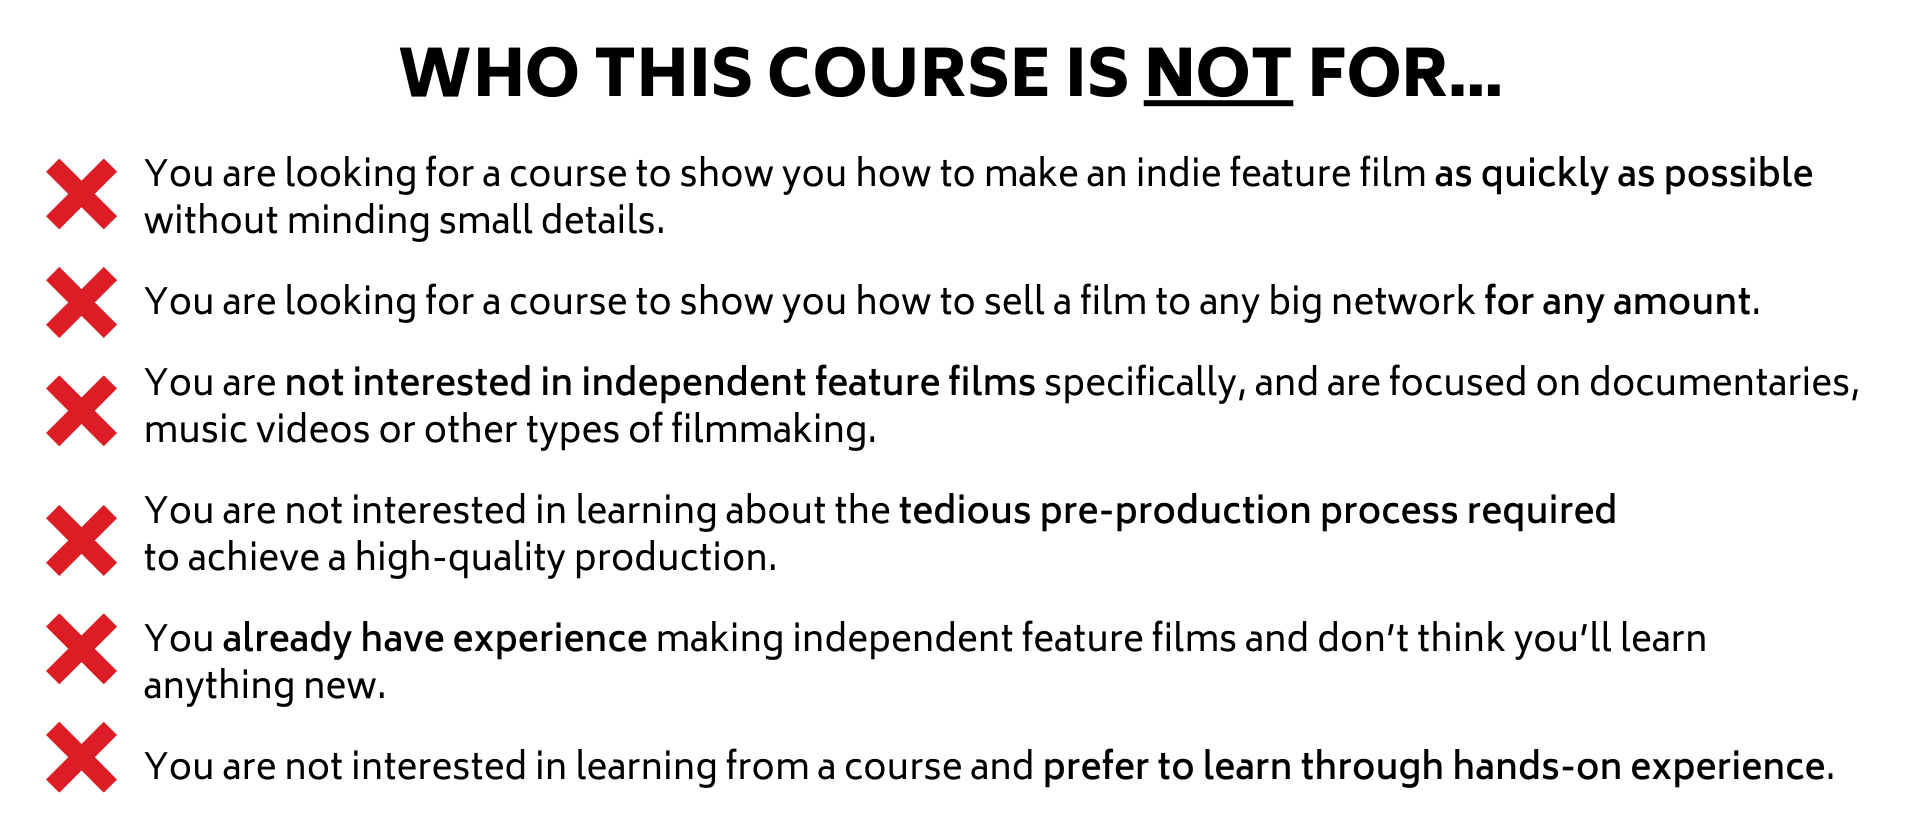 You are looking for a course to show you how to make an indie feature film as quickly as possible without minding small details.  You are looking for a course to show you how to sell a film to any big network for any amount.   You are not interested in independent feature films specifically, and are focused on documentaries, music videos or other types of filmmaking.  You are not interested in learning about the tedious pre-production process required  to achieve a high-quality production.  You already have experience making independent feature films and don’t think you’ll learn  anything new.   You are not interested in learning from a course and prefer to learn through hands-on experience.